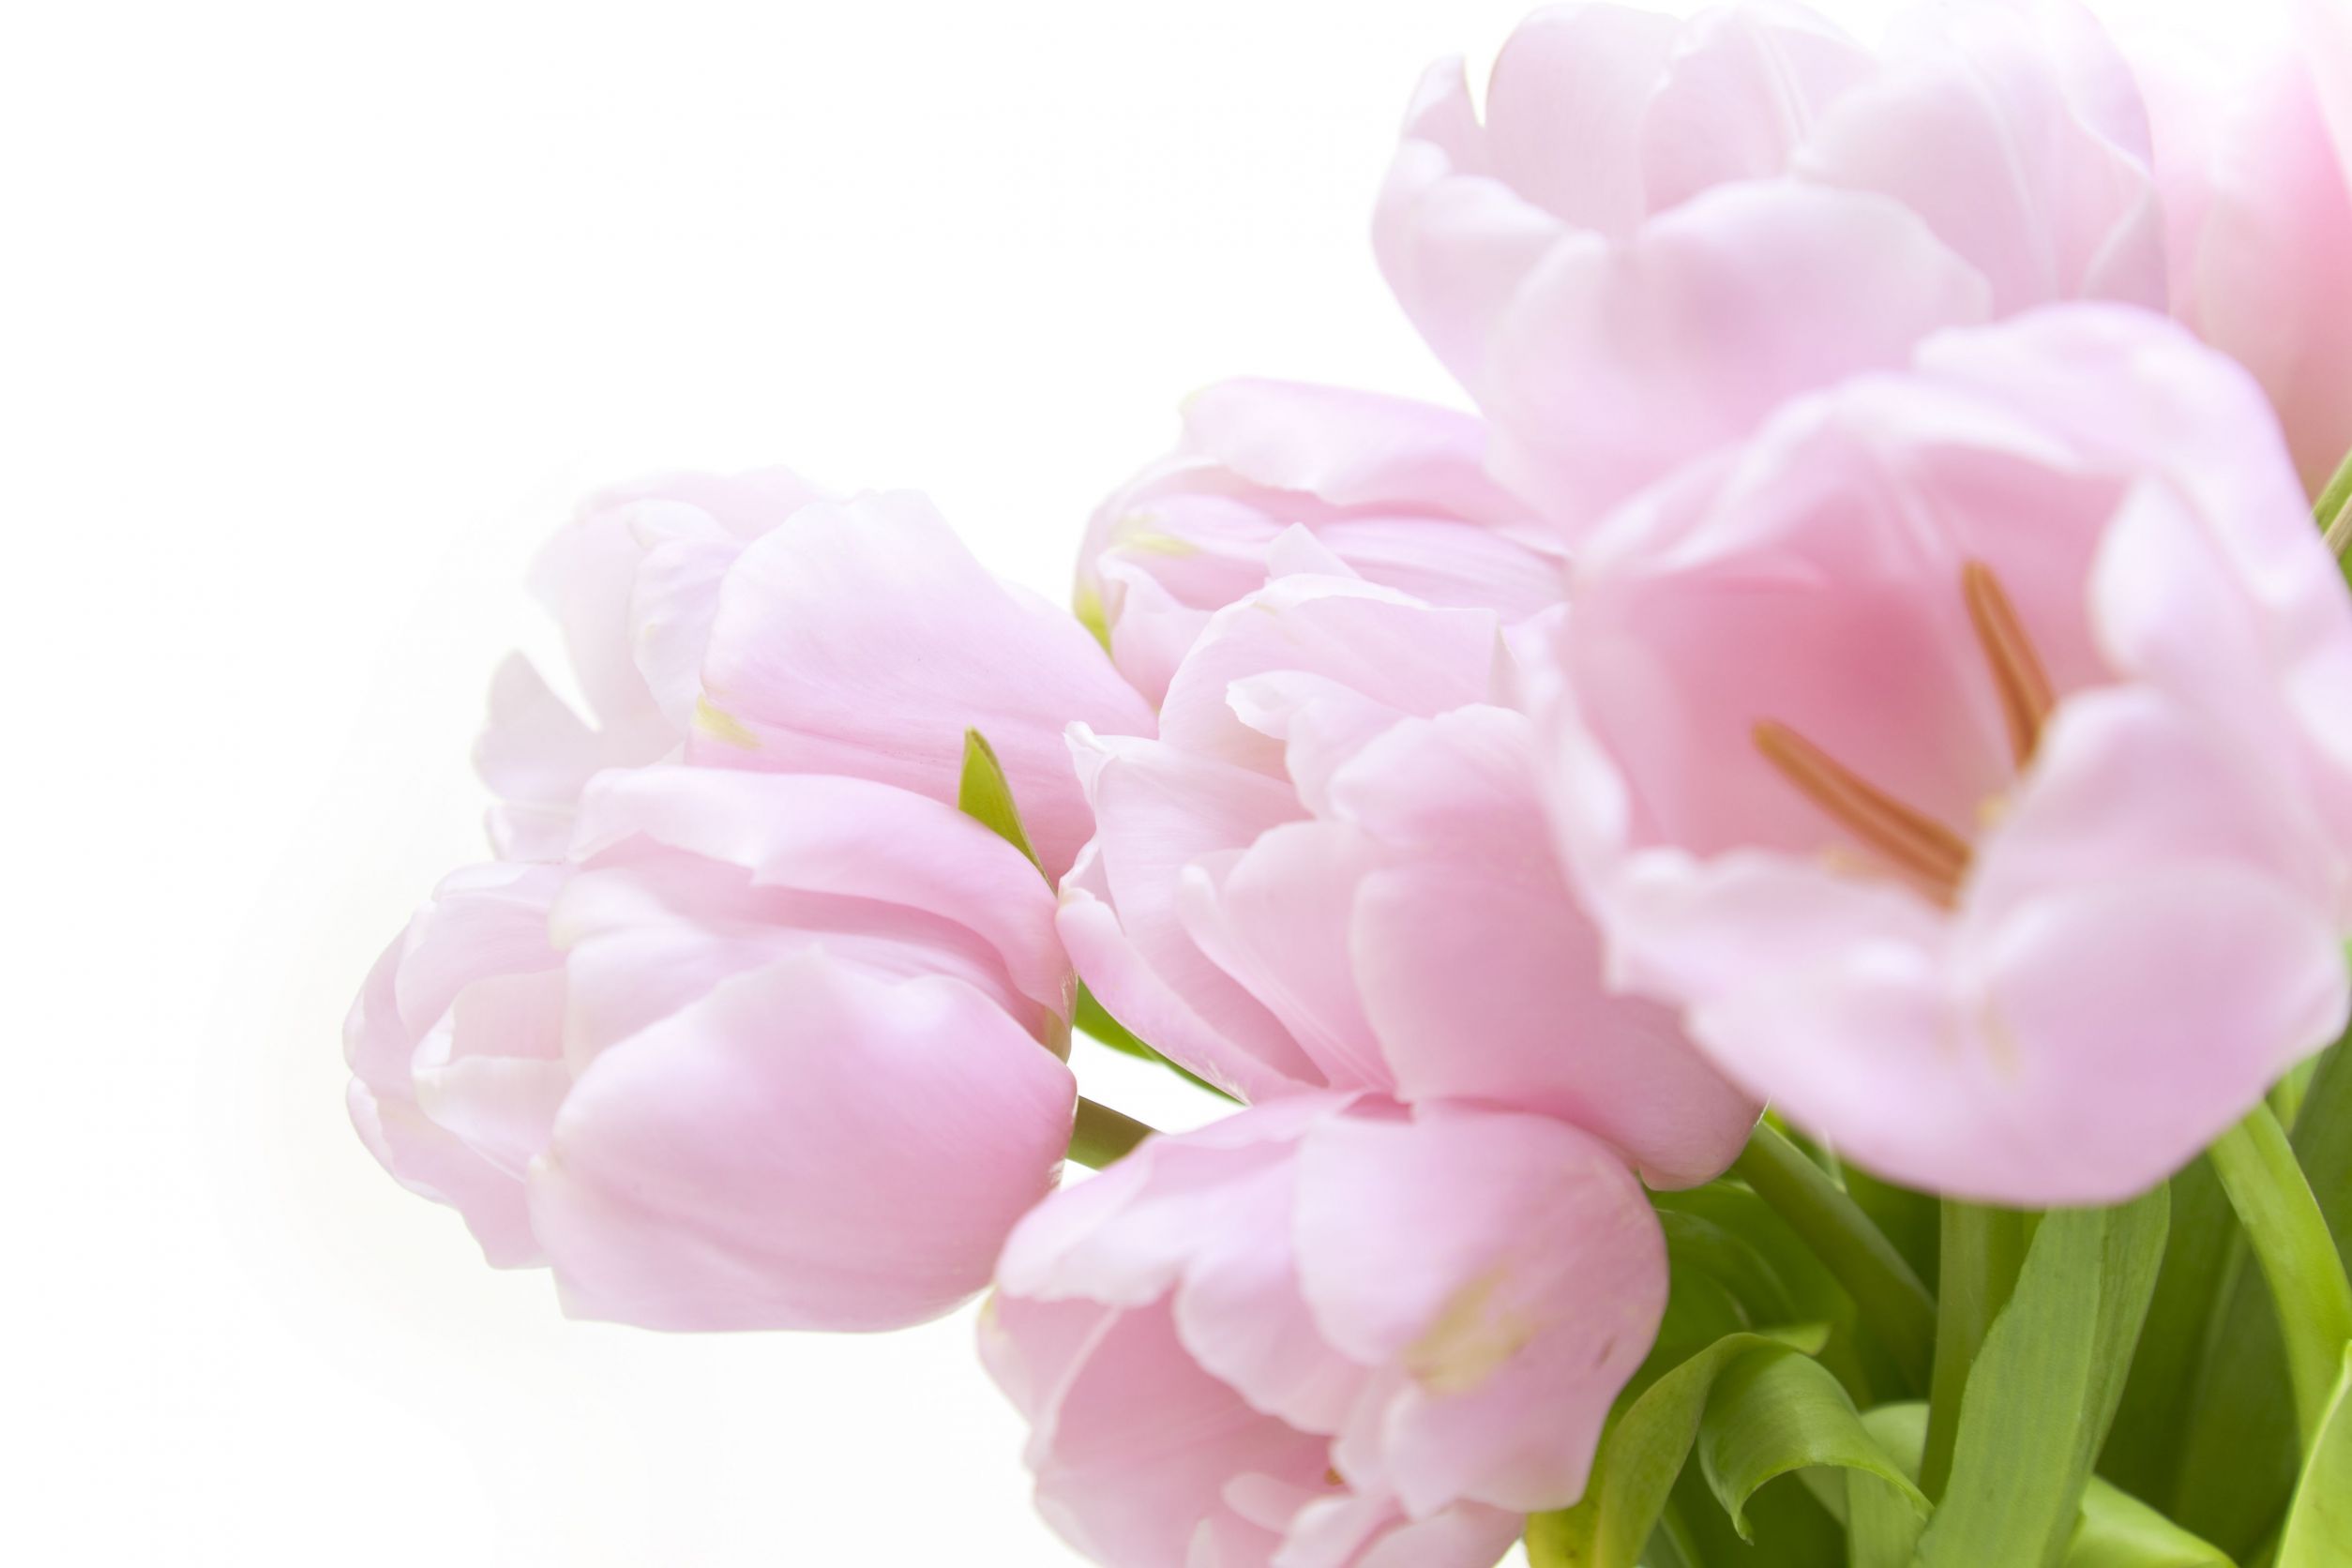 Finding a Florist for an Arrangement with a Beautiful Spring Flower in Estero, FL is Both Easy and Affordable